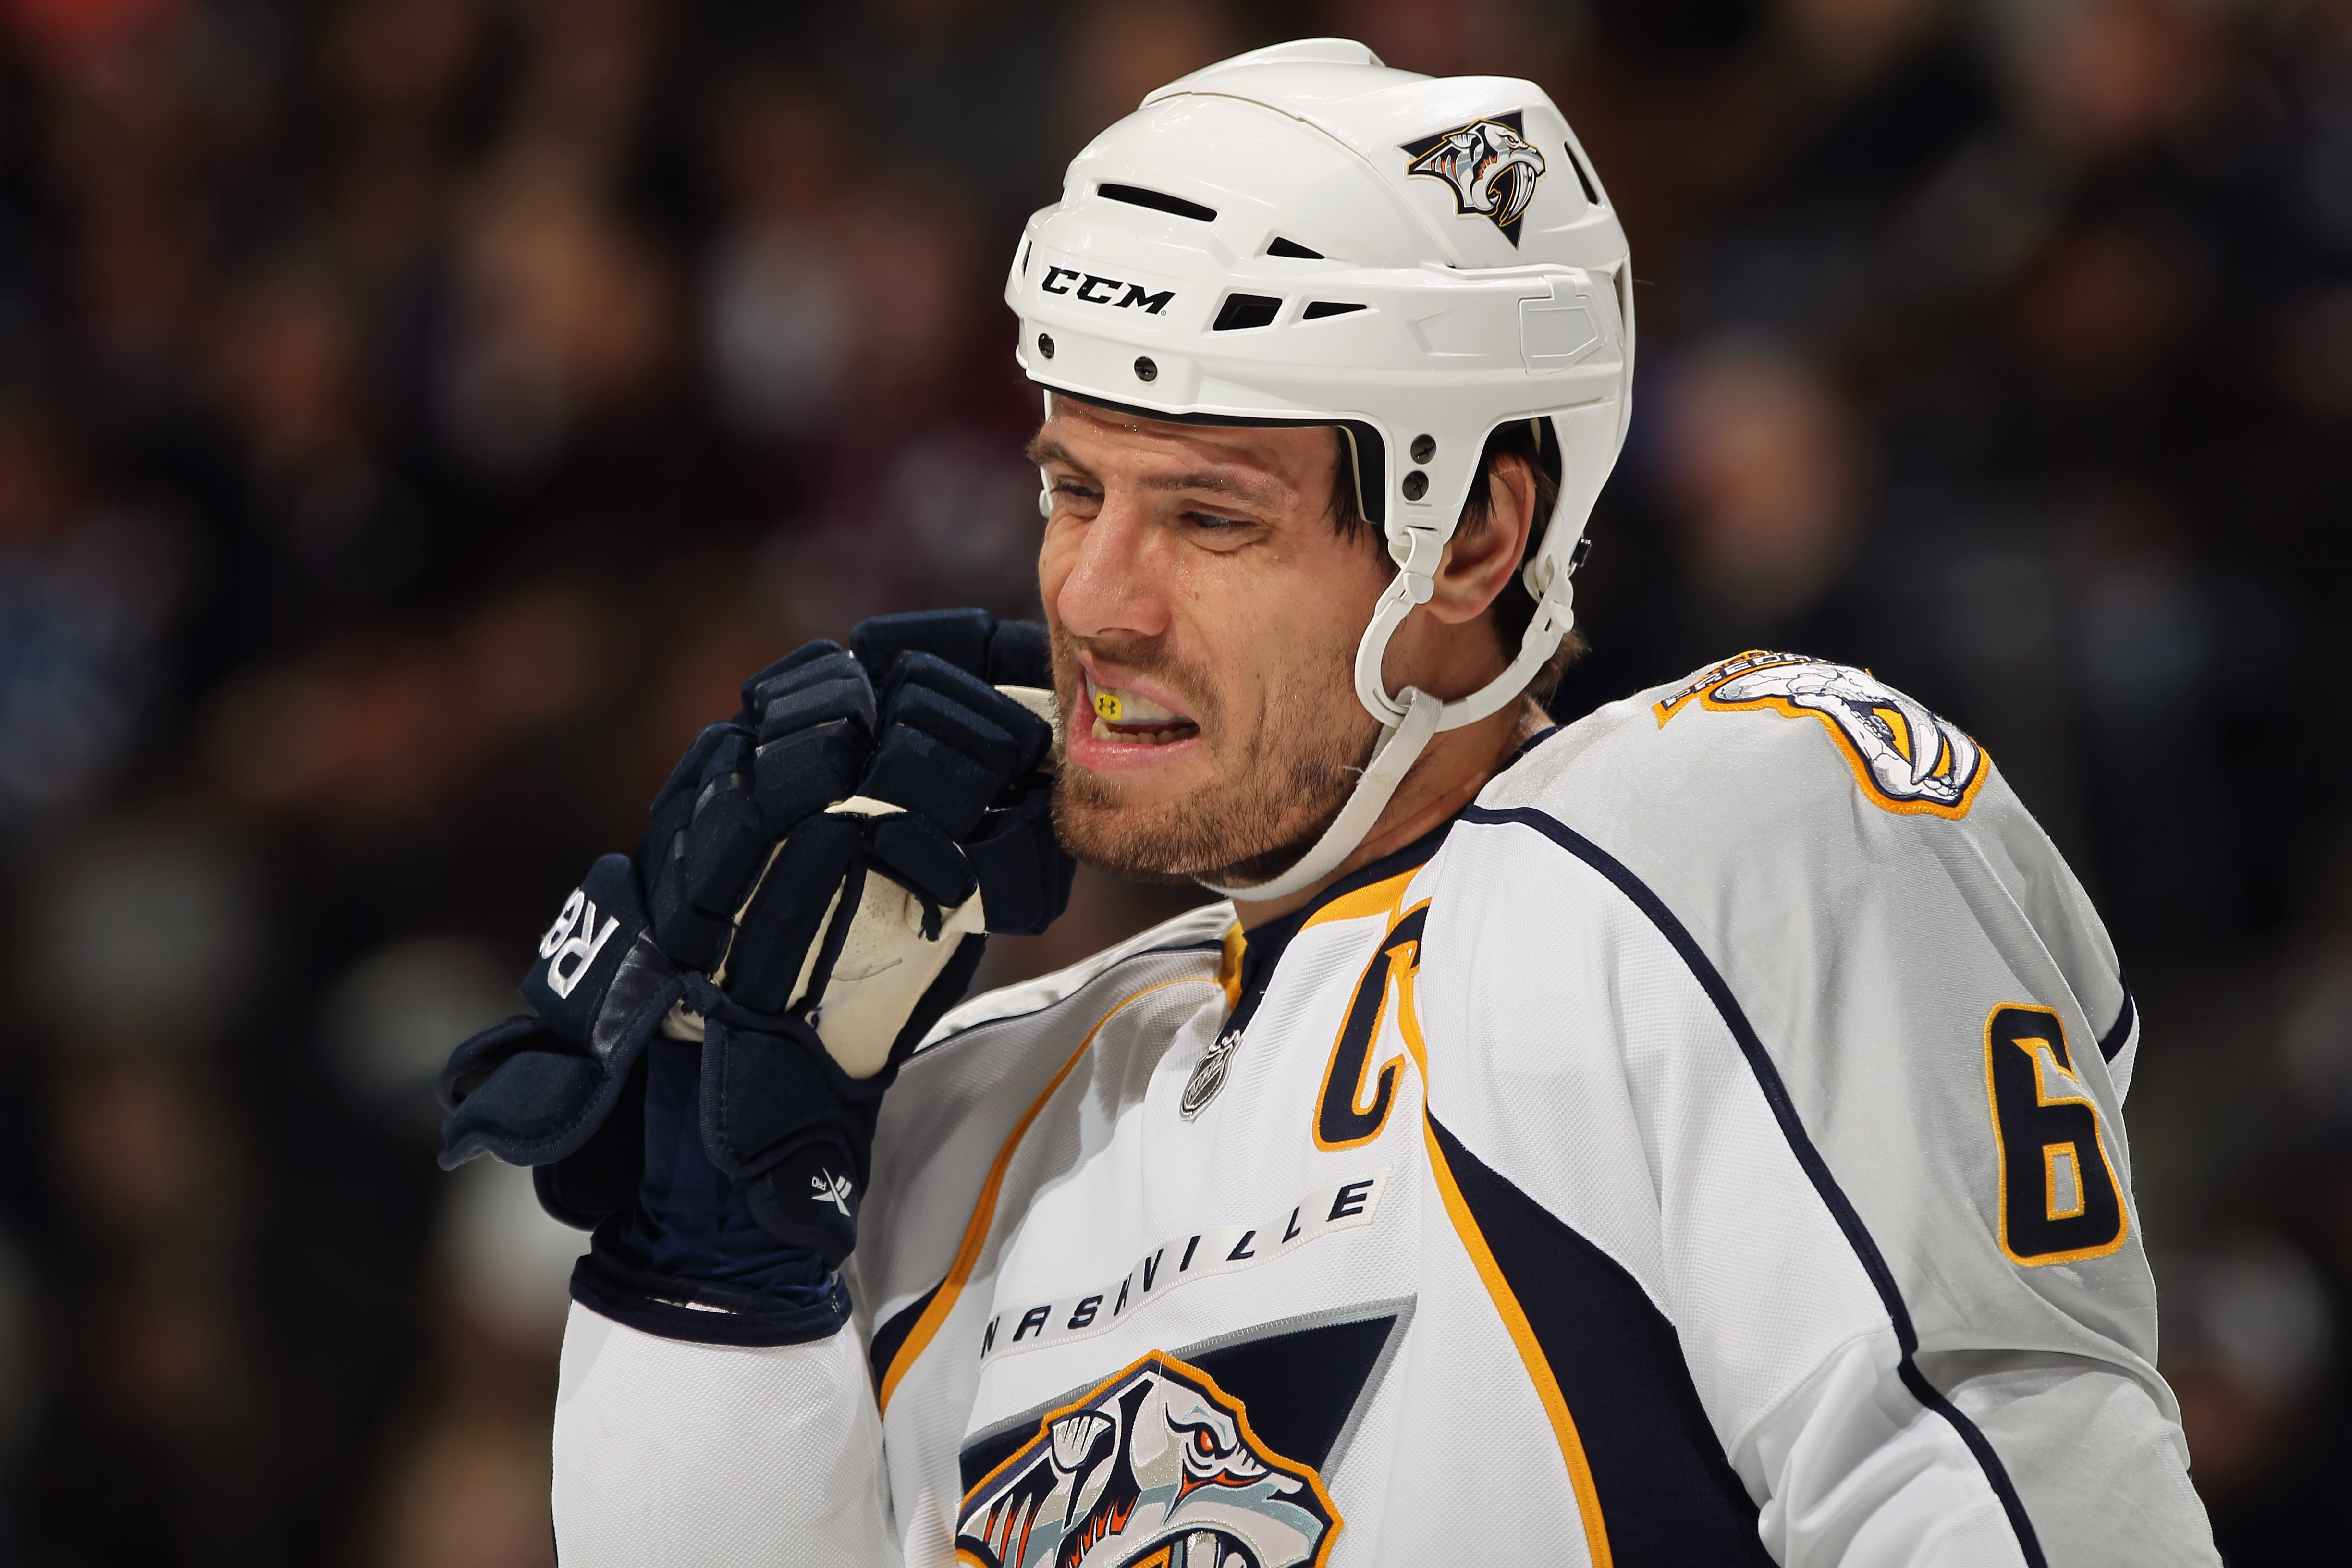 DENVER, CO - JANUARY 20:  Shea Weber #6 of the Nashville Predators looks on during a break in the action against the Colorado Avalanche at the Pepsi Center on January 20, 2011 in Denver, Colorado. The Predators defeated the Avalanche 5-1.  (Photo by Doug